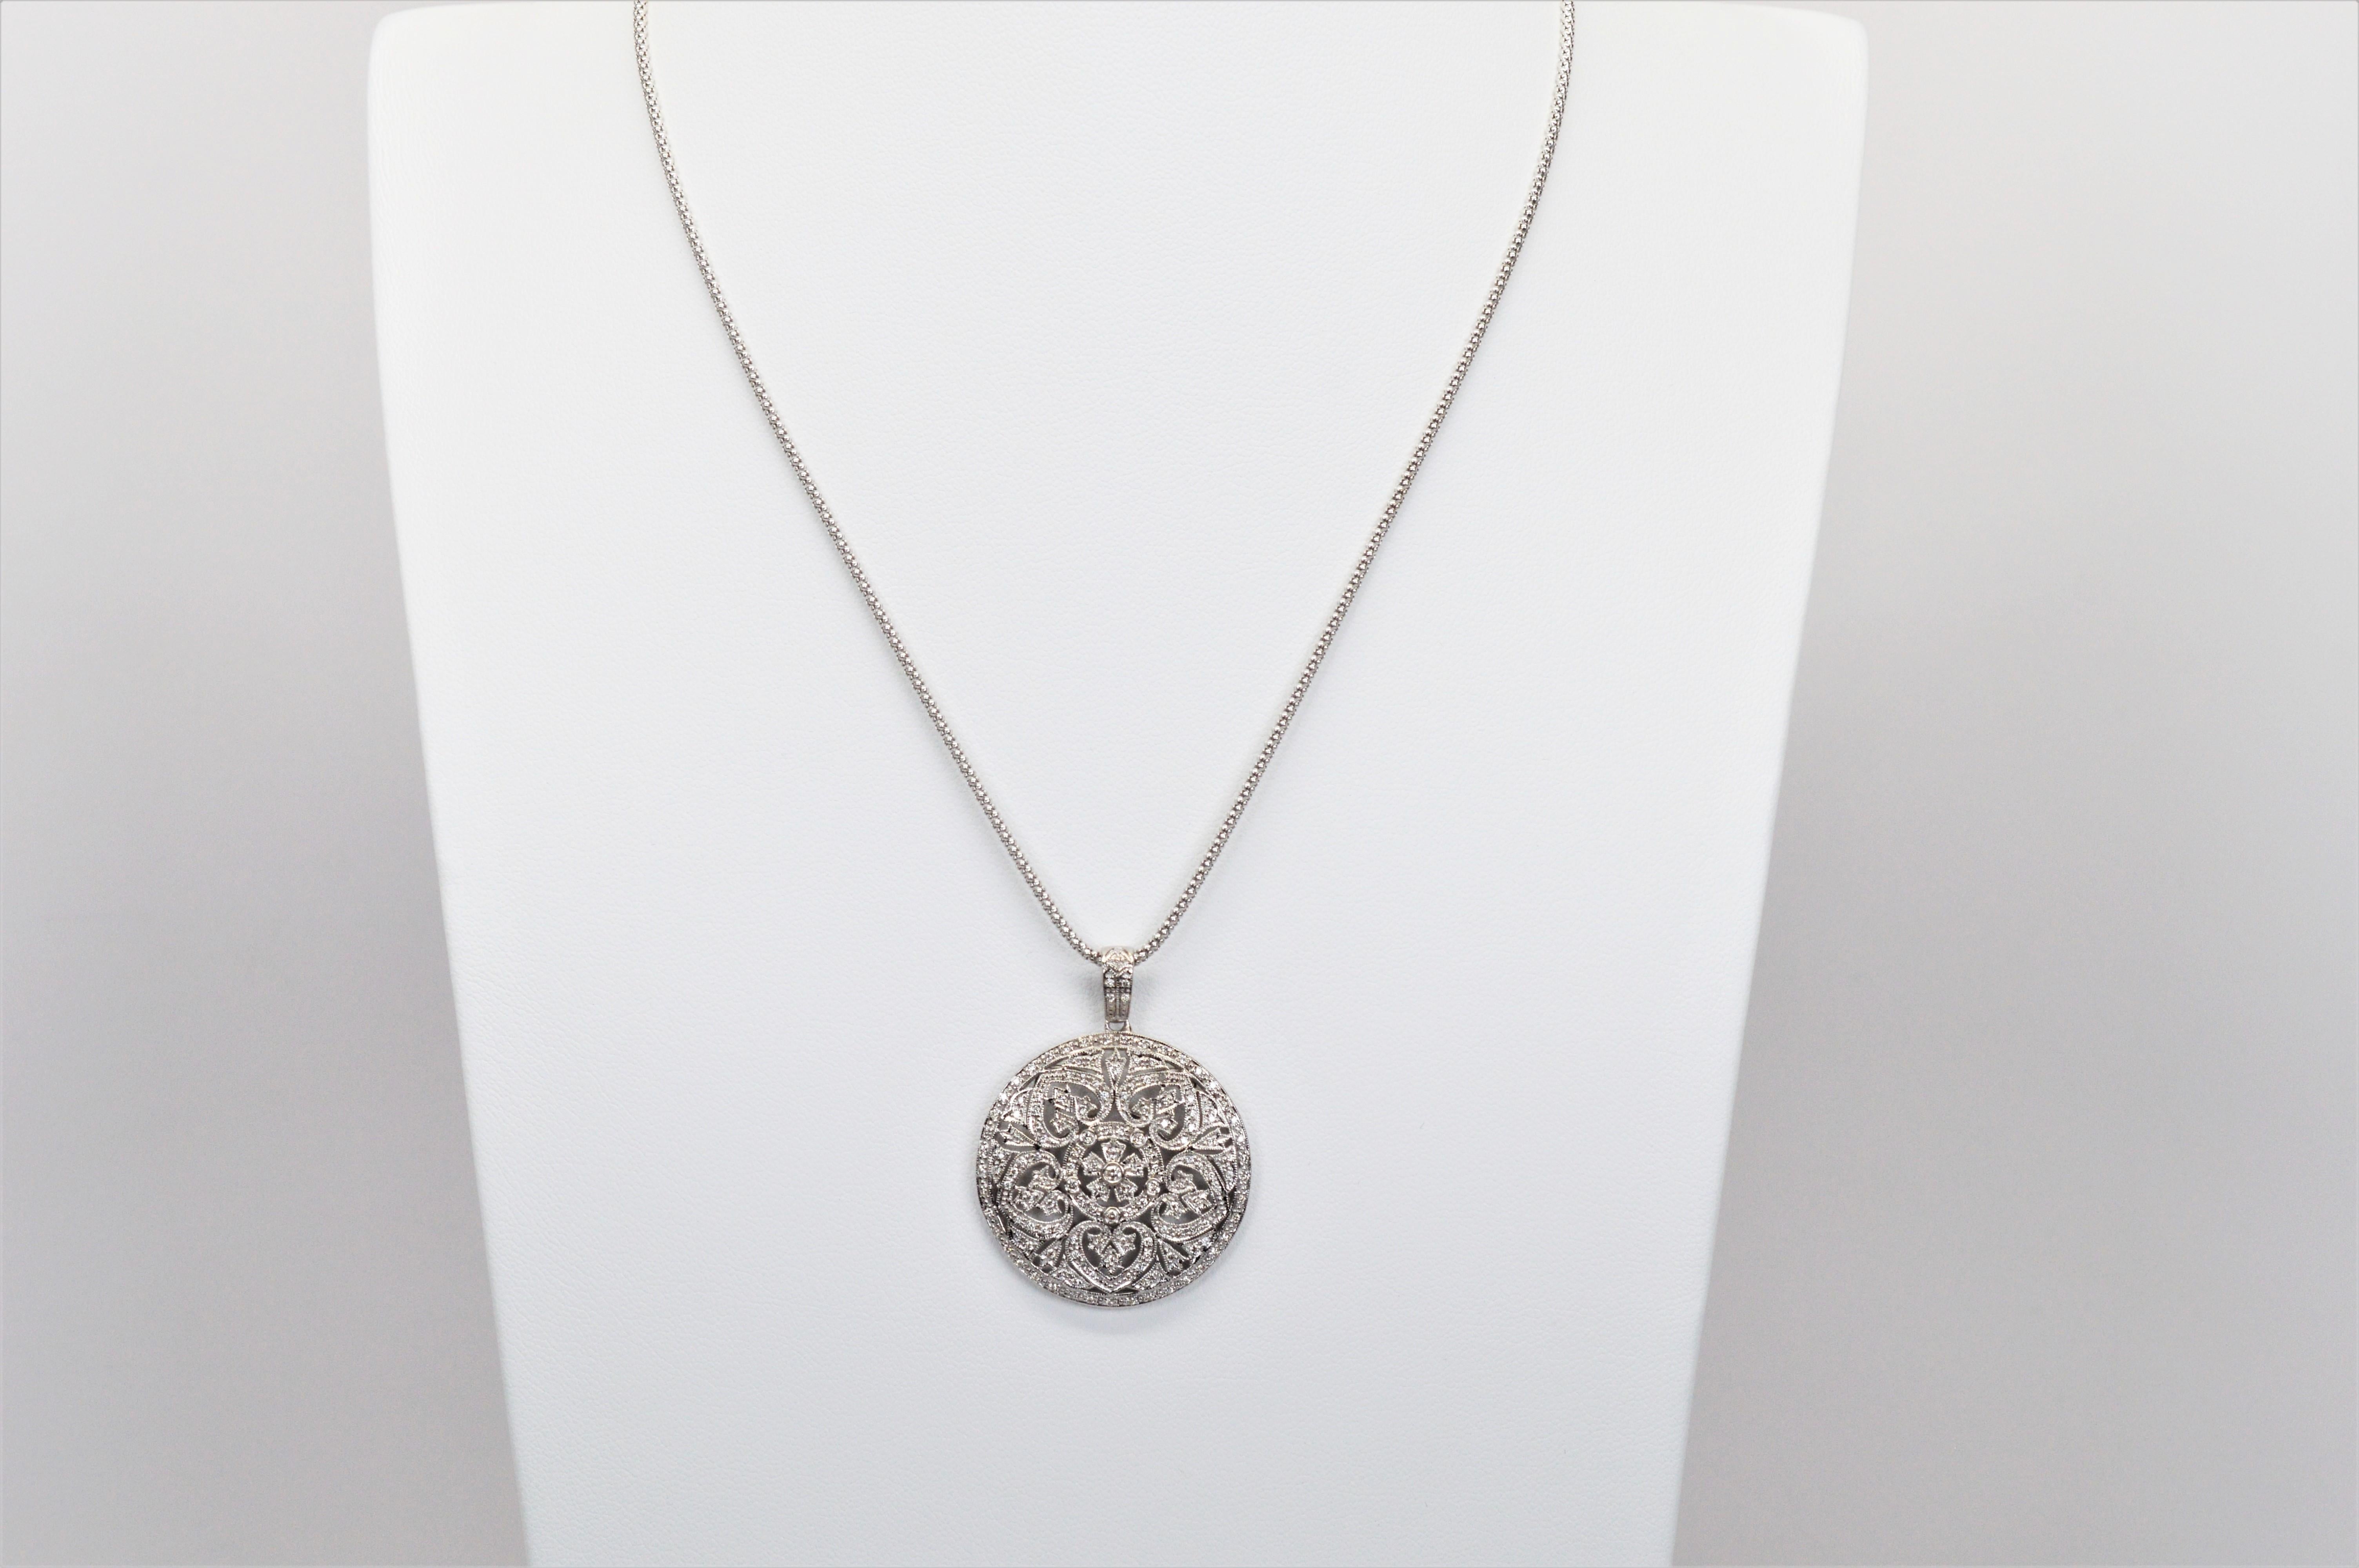 With plenty of shimmer, this exquisite diamond covered 1-1/8 inch round medallion pendant in fourteen karat 14K white gold is suspended on a 16 inch glistening 1.75mm 14 karat white gold popcorn chain. 
Quality Italian made, the intricate pendant is